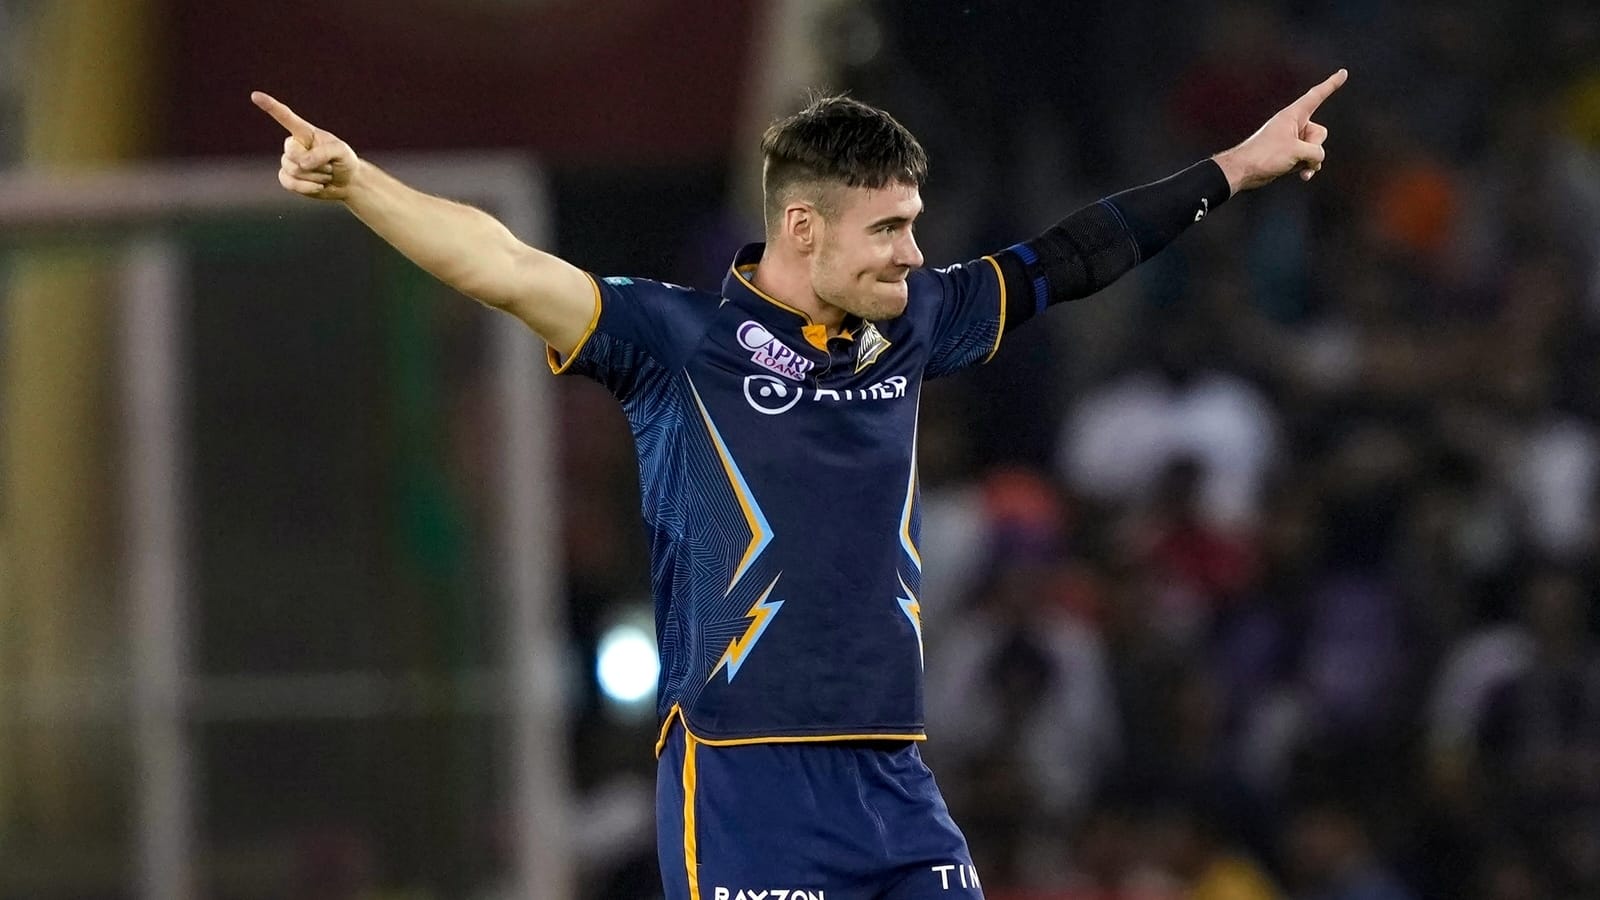 Josh Little to join Ireland T20 World Cup squad after IPL